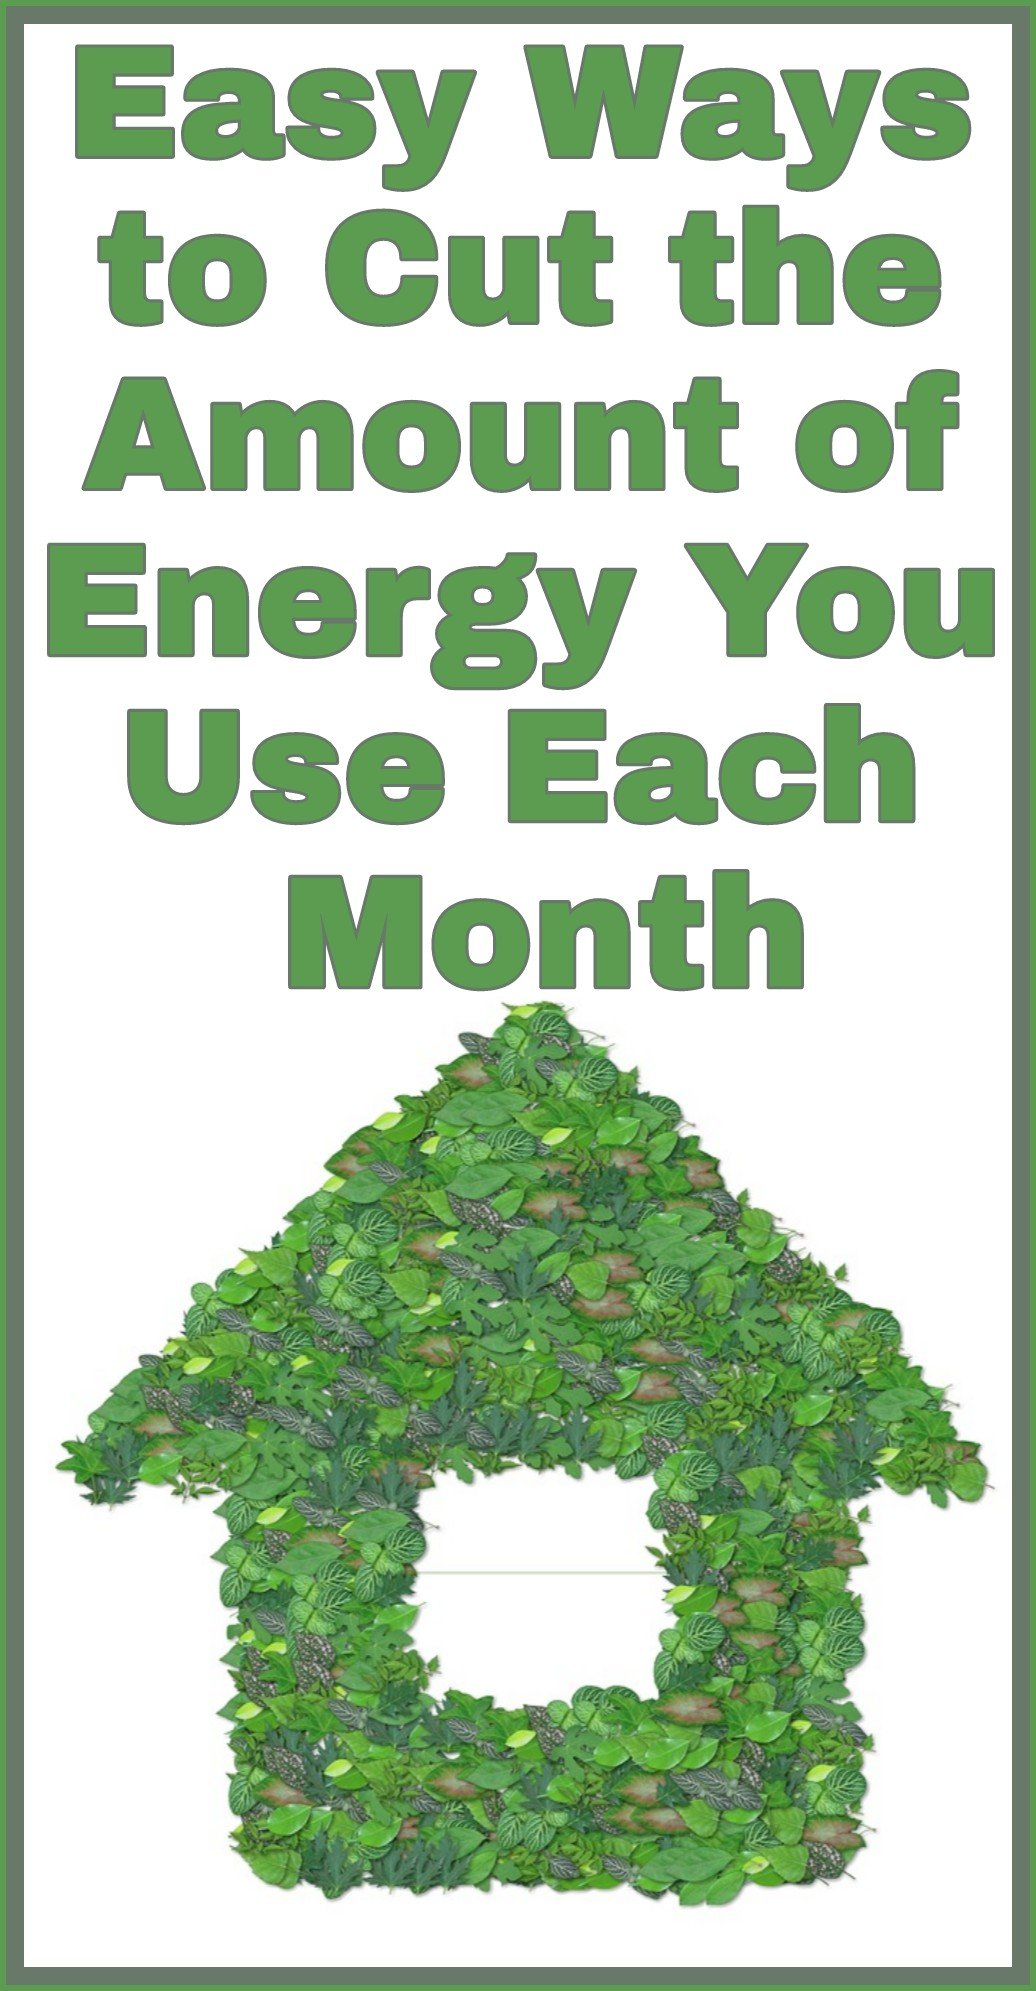 Easy Ways to Cut the Amount of Energy You Use Each Month title with image of house made of leaves